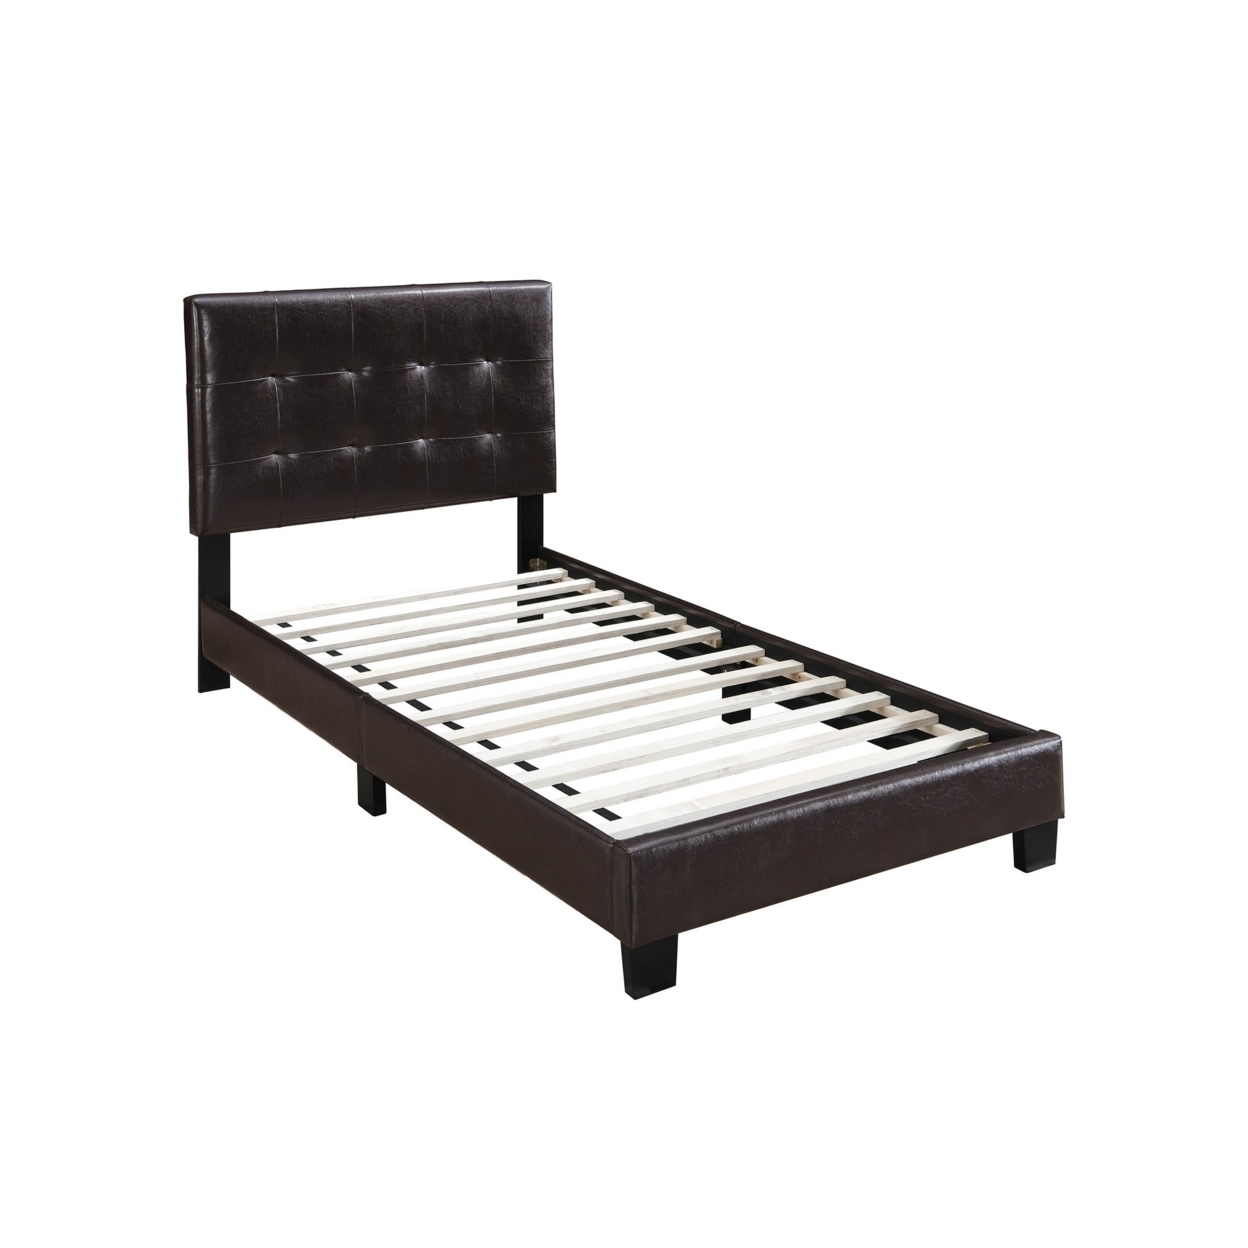 Full Leatherette Bed With Checkered Tufted Headboard, Dark Brown- Saltoro Sherpi